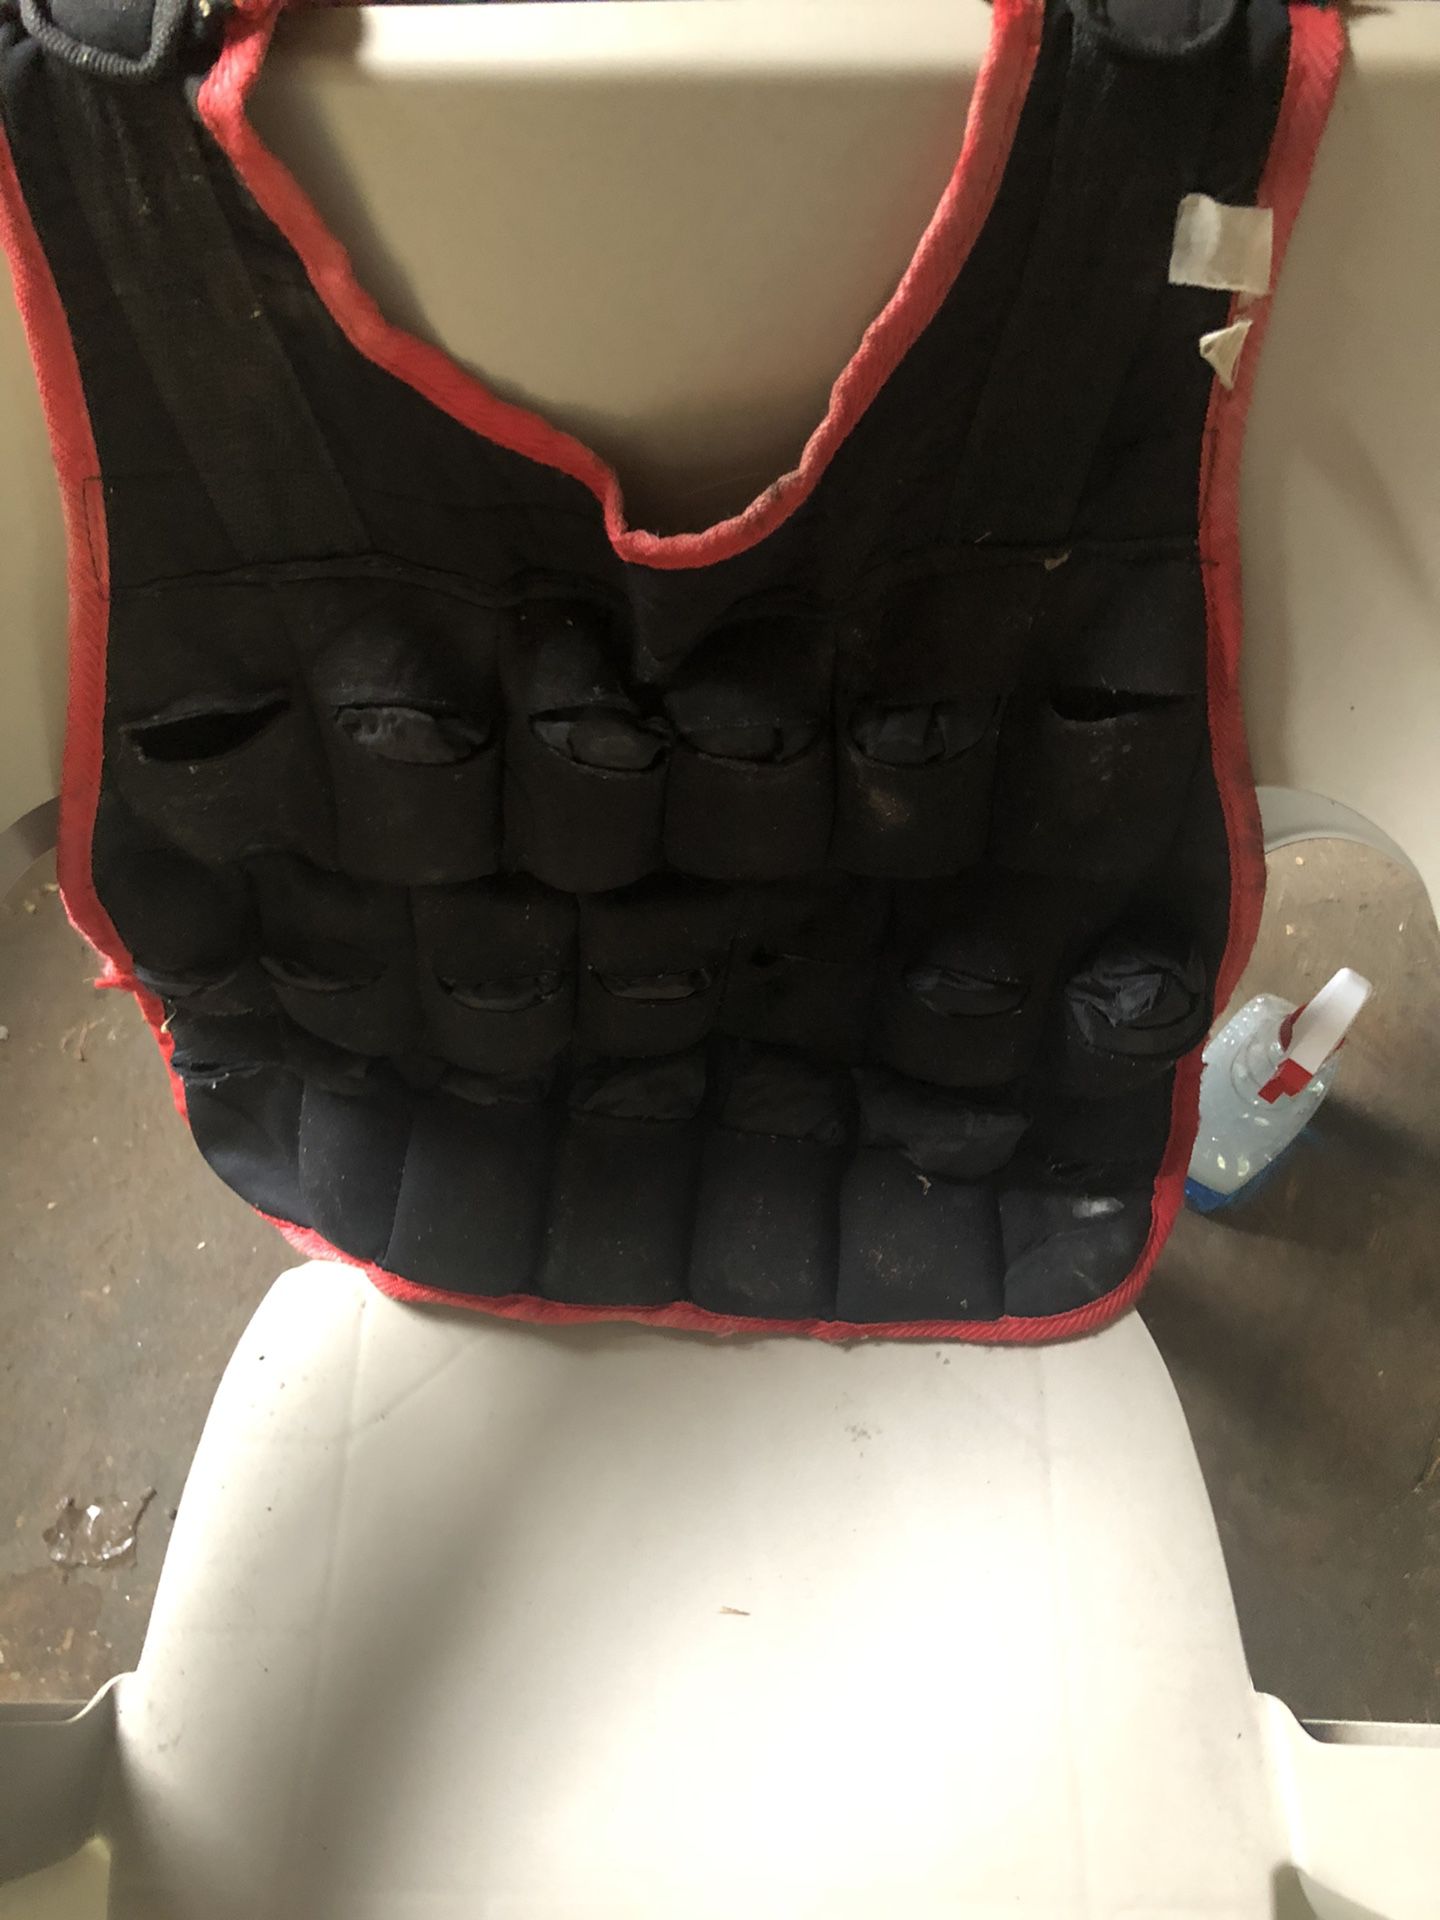 Weighted vest $25, 35lb dumbbell $25